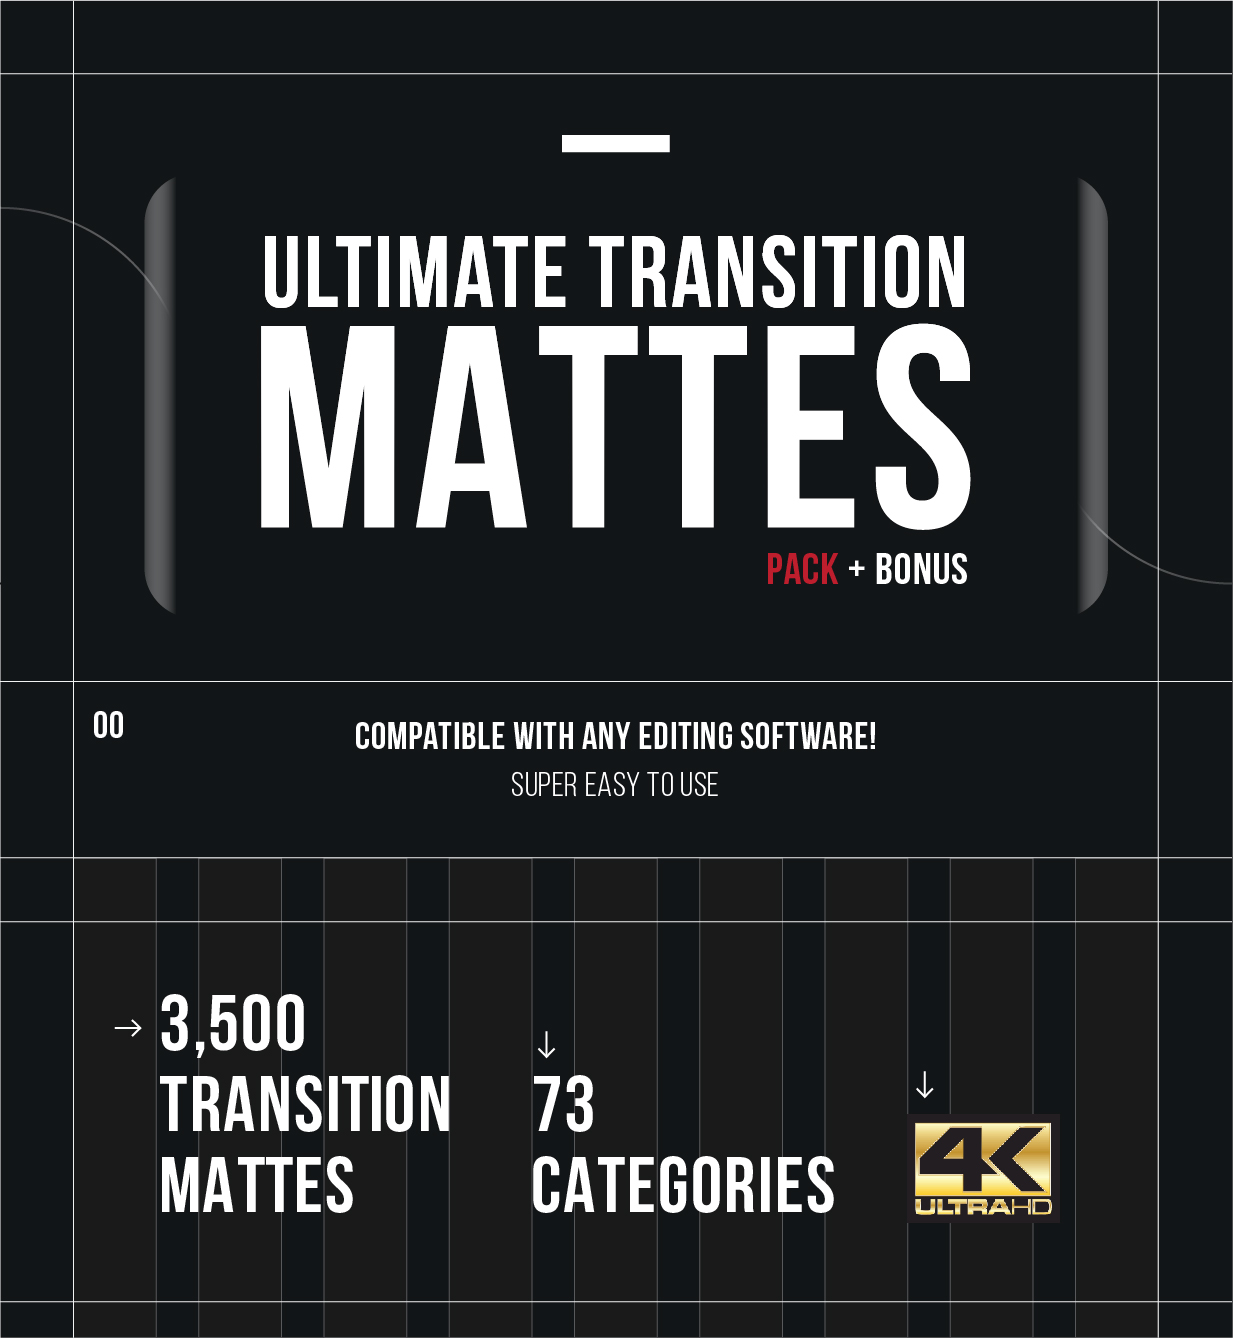 Ultimate Transition Mattes Pack